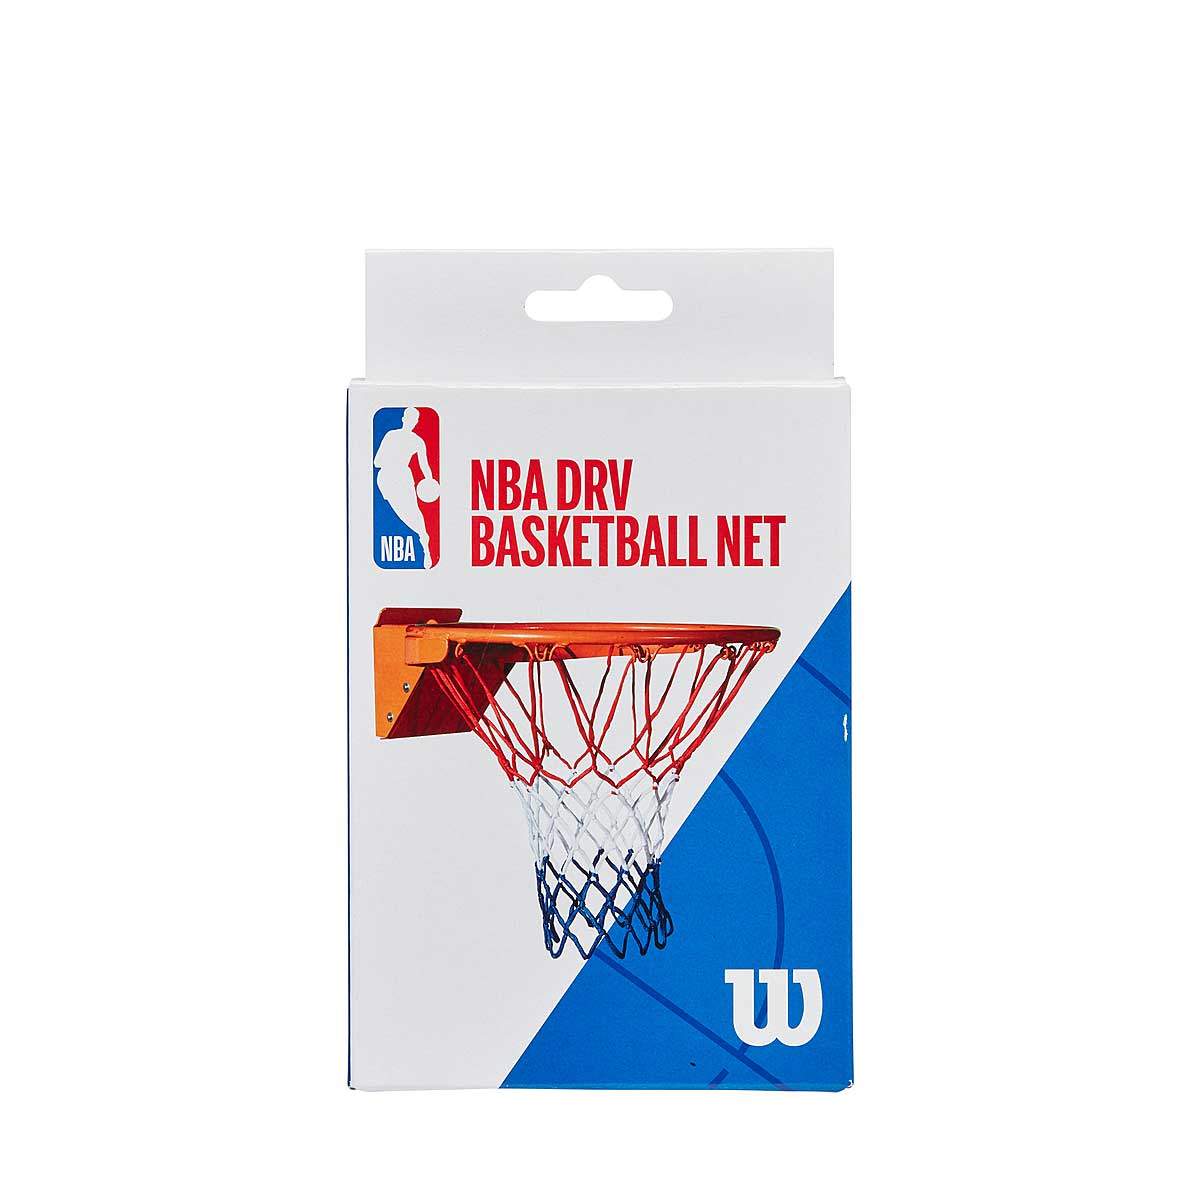 Basketball Net Outdoor Use Fits Standard Rims Red/White/Blue 